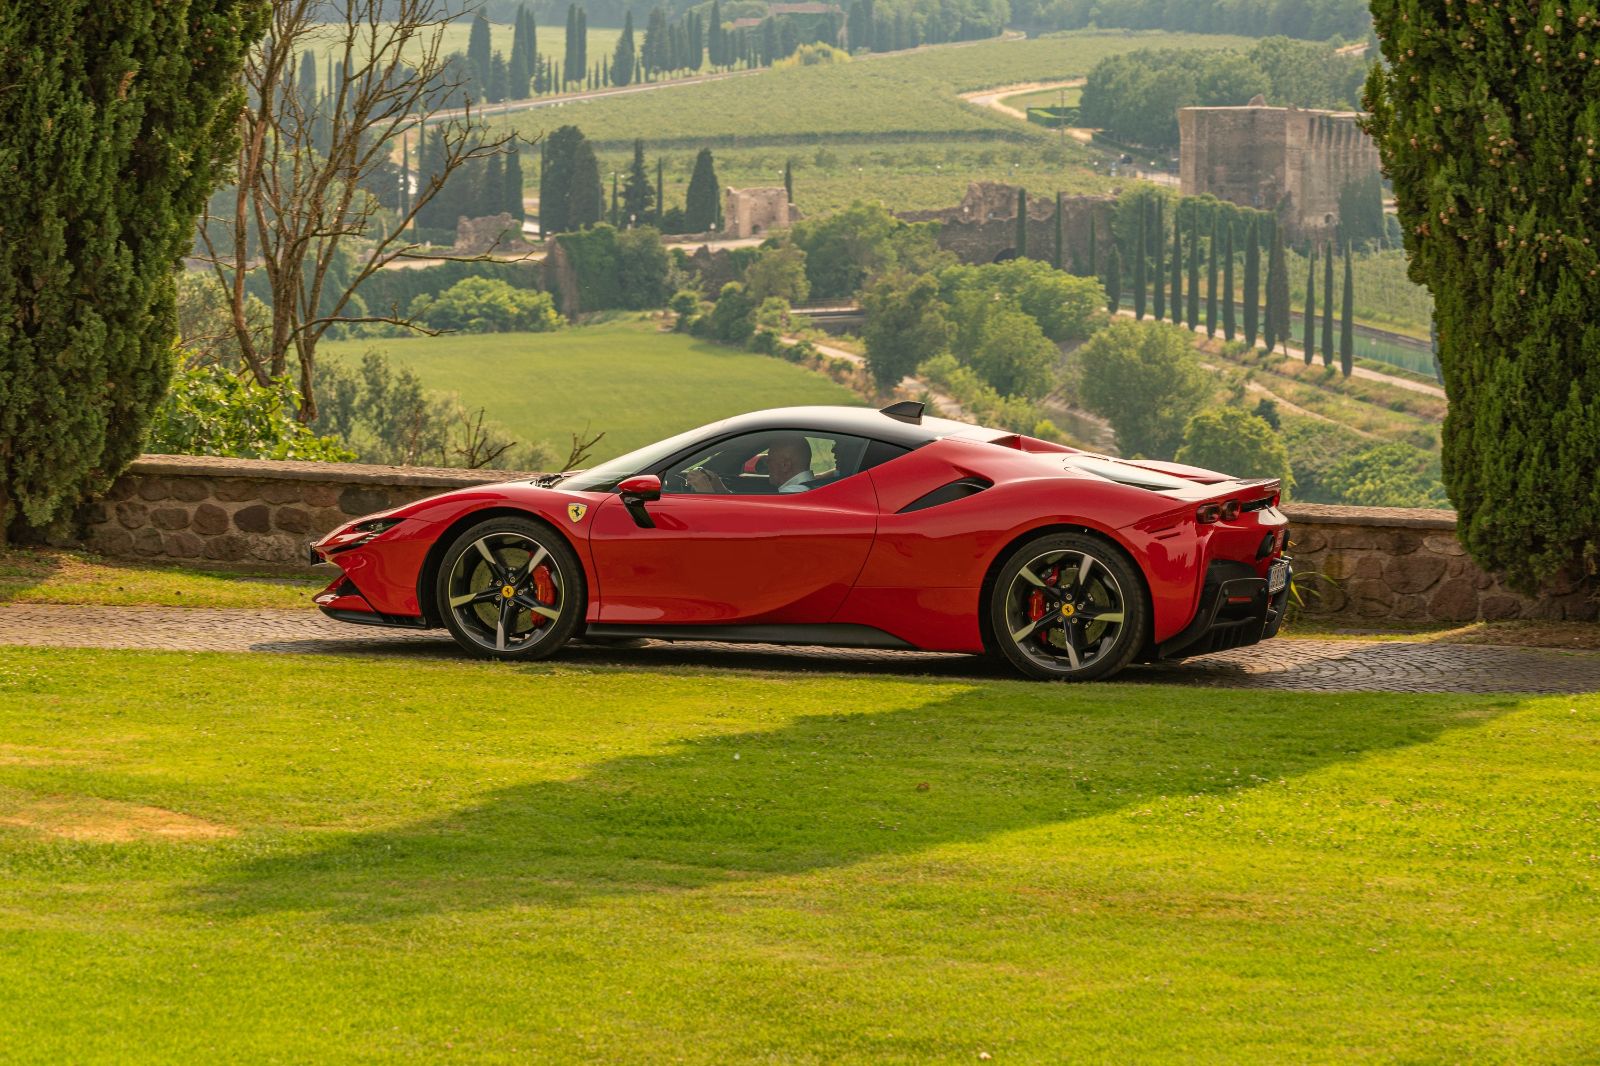 A red Ferrari parked at a viewpoint of Tuscany landscapes in Italy